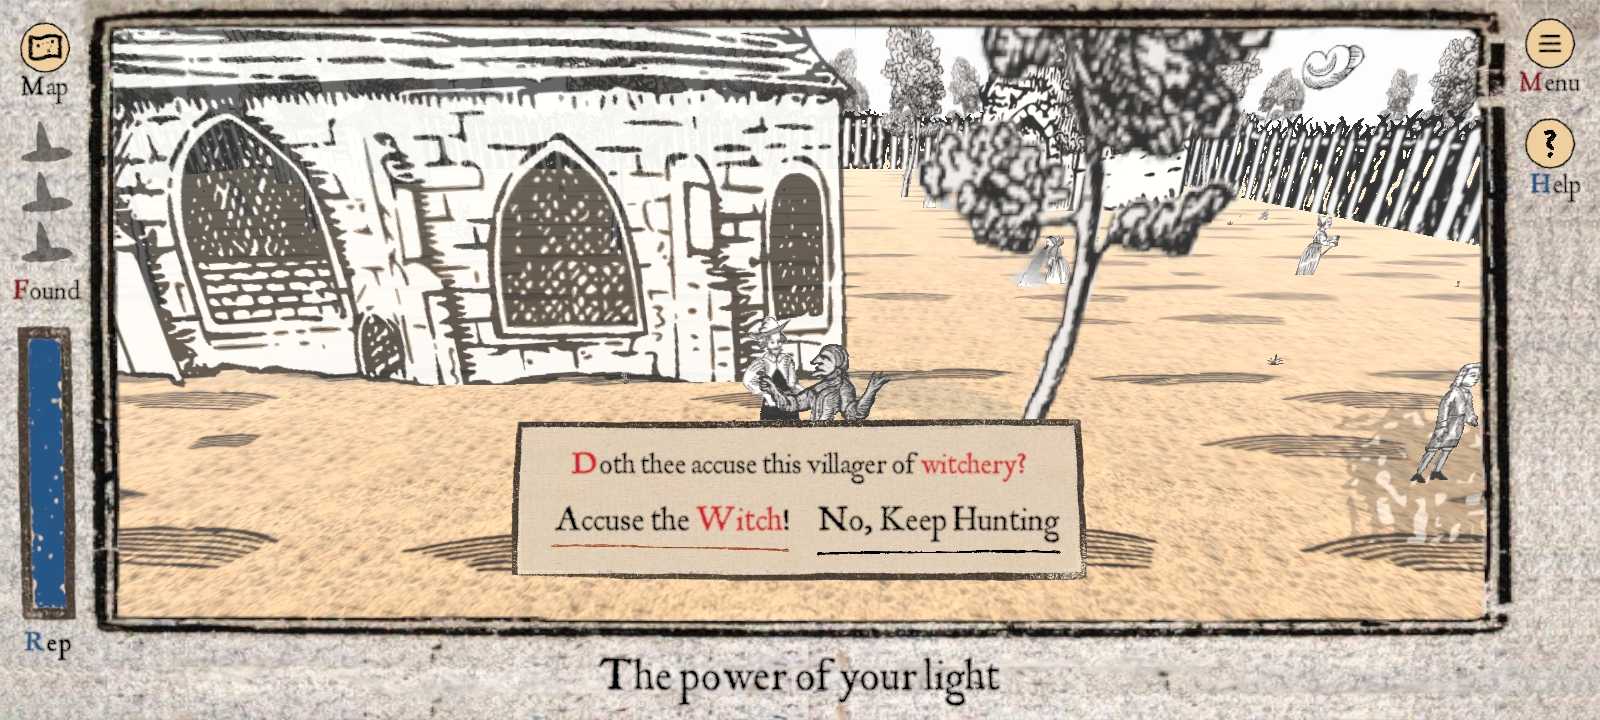 A screenshot from Which is Witch depicting the player in the middle of accusing a viller. A popup on the bottom of the screen asks the player: Doth thee acuse this villager of witchery? With these two options to respond displayed below: Accuse the Witch. No, Keep Hunting.